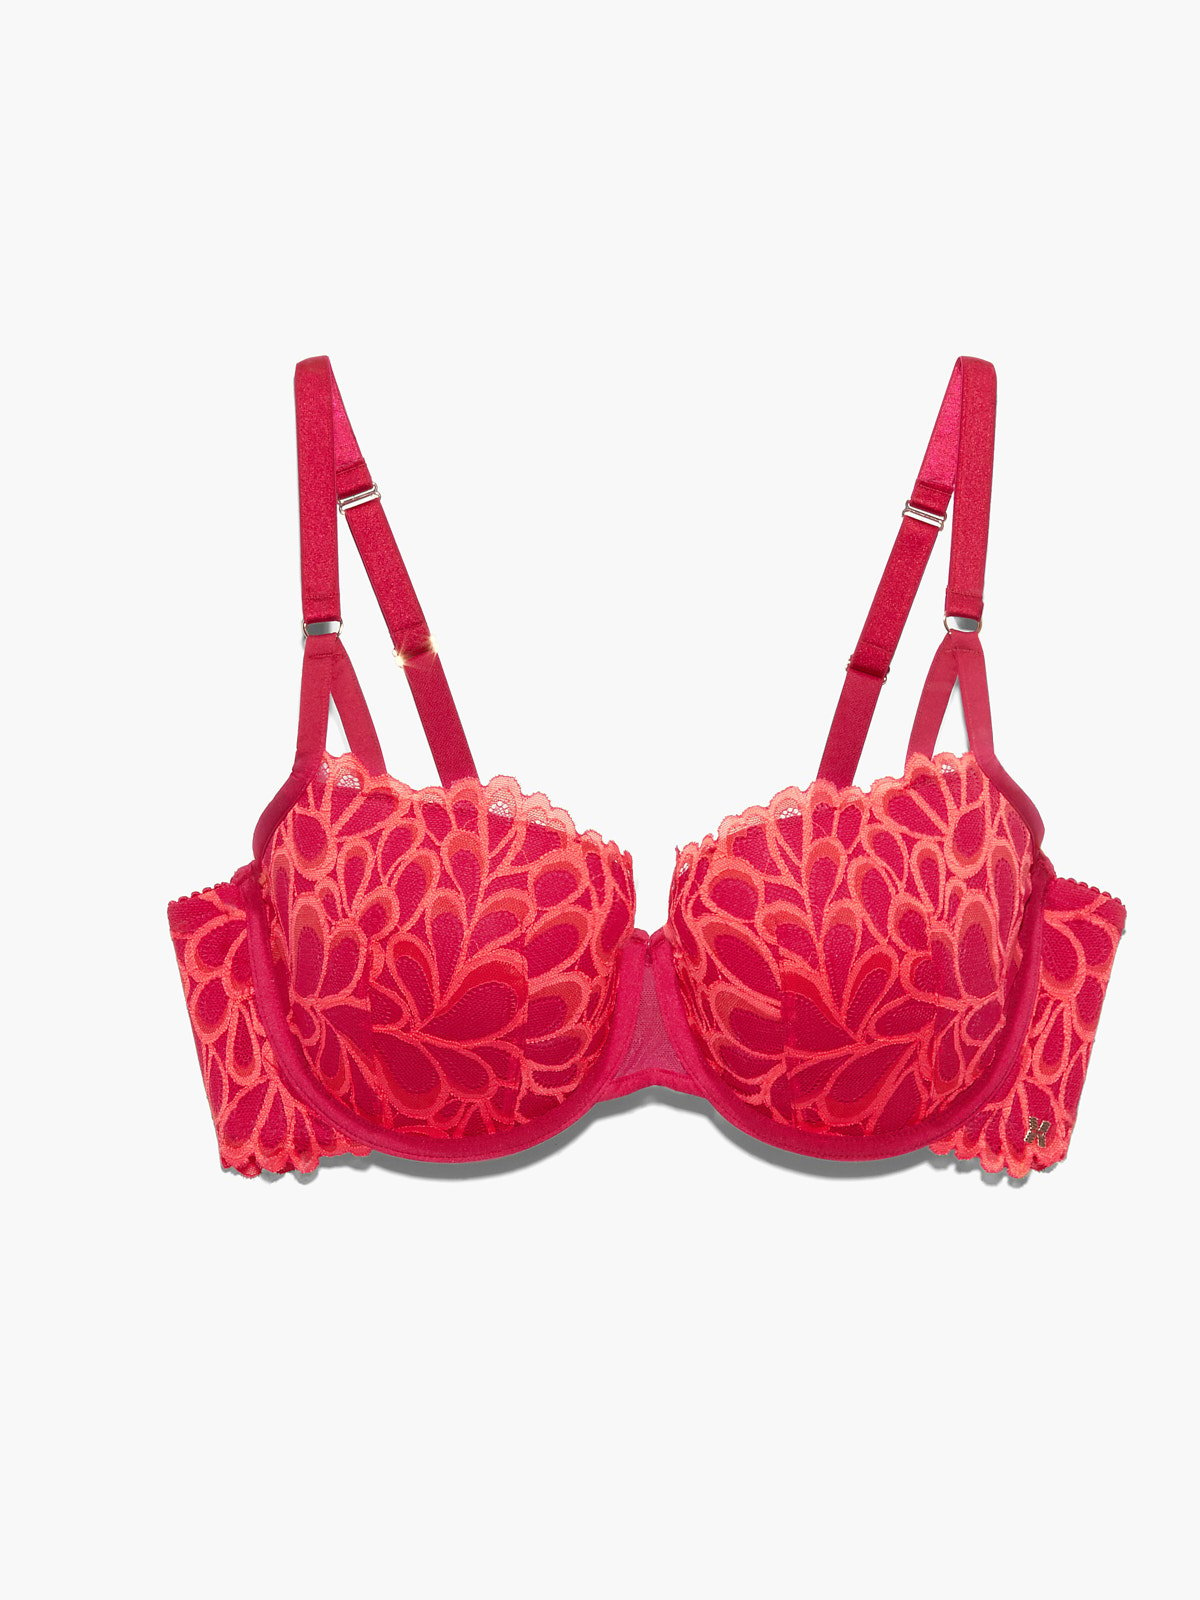 Savage Not Sorry Lightly Lined Lace Balconette Bra in Pink & Red